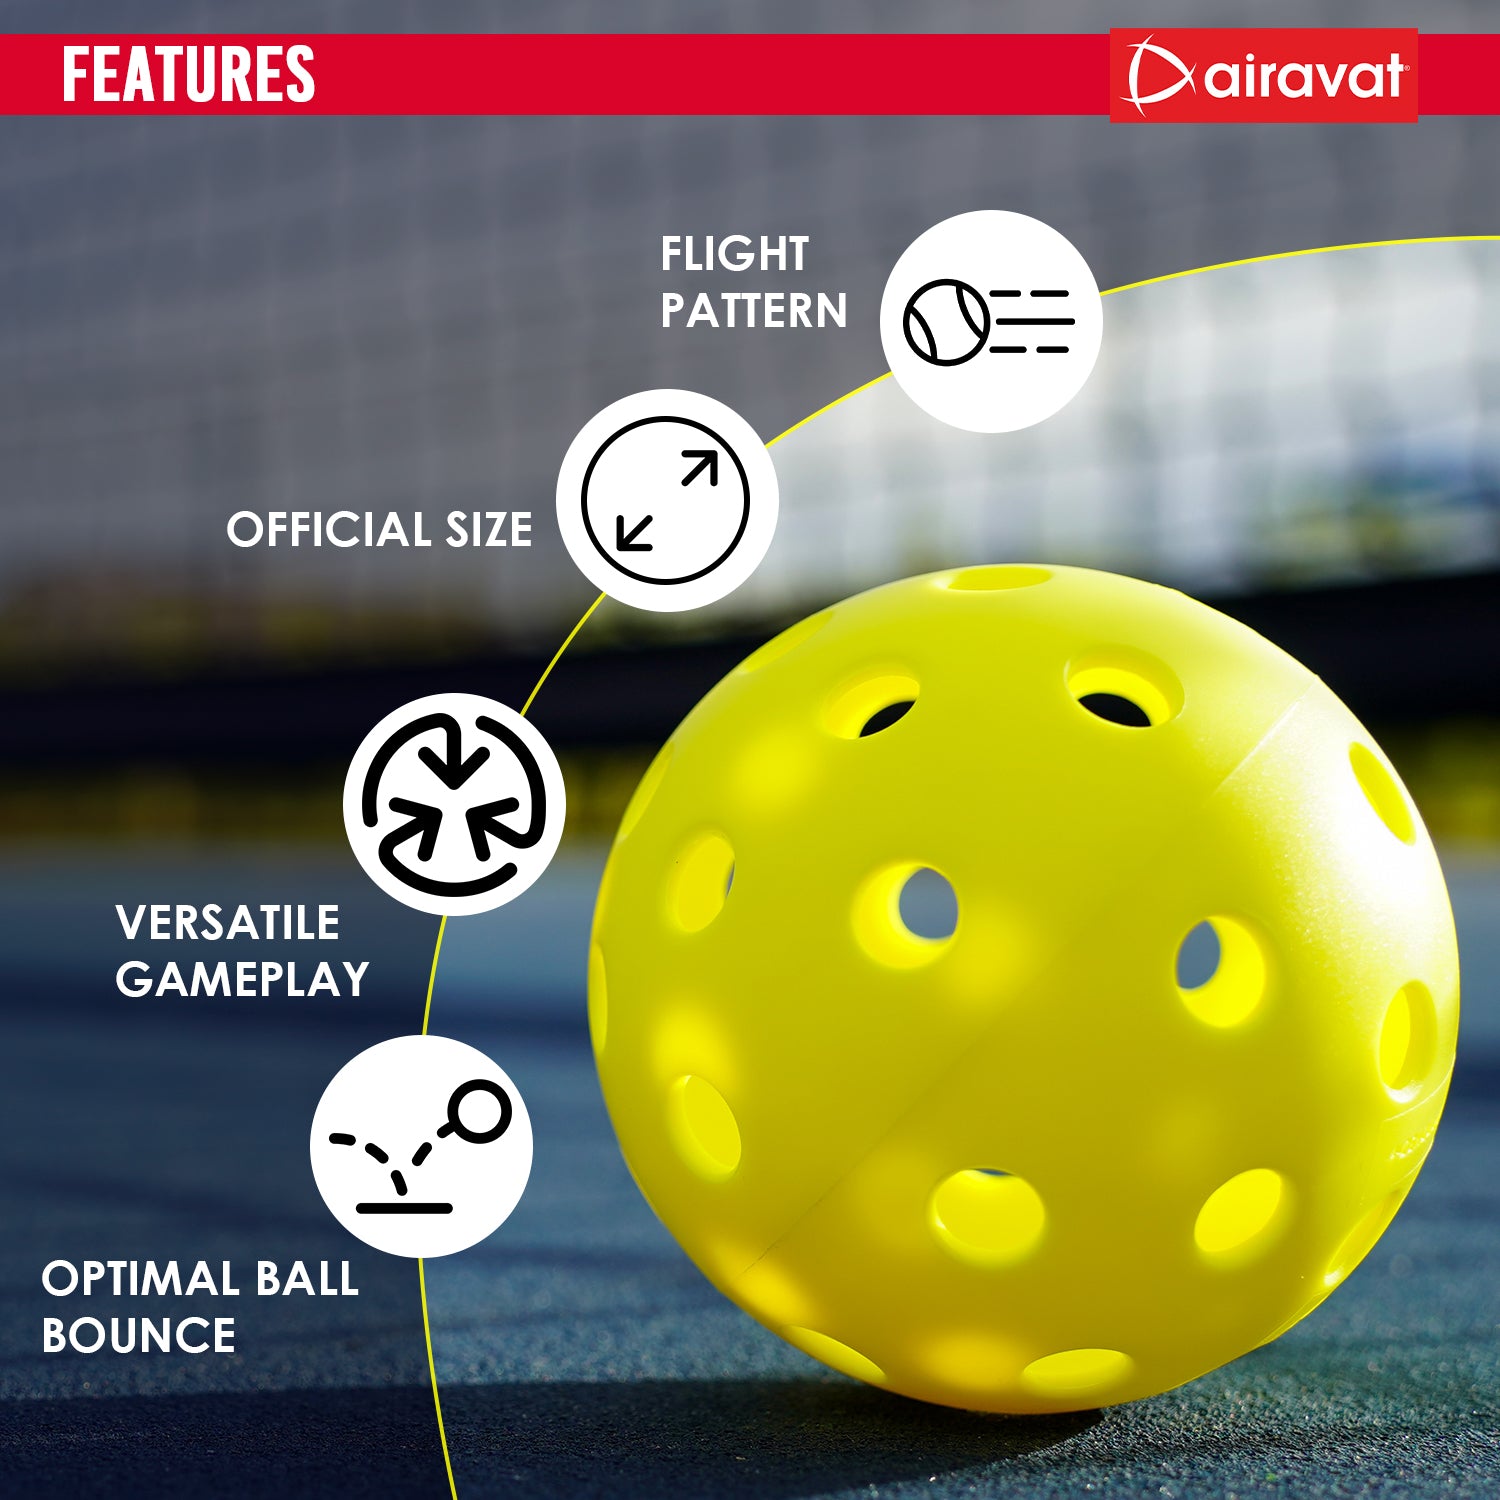 pickle ball features yellow